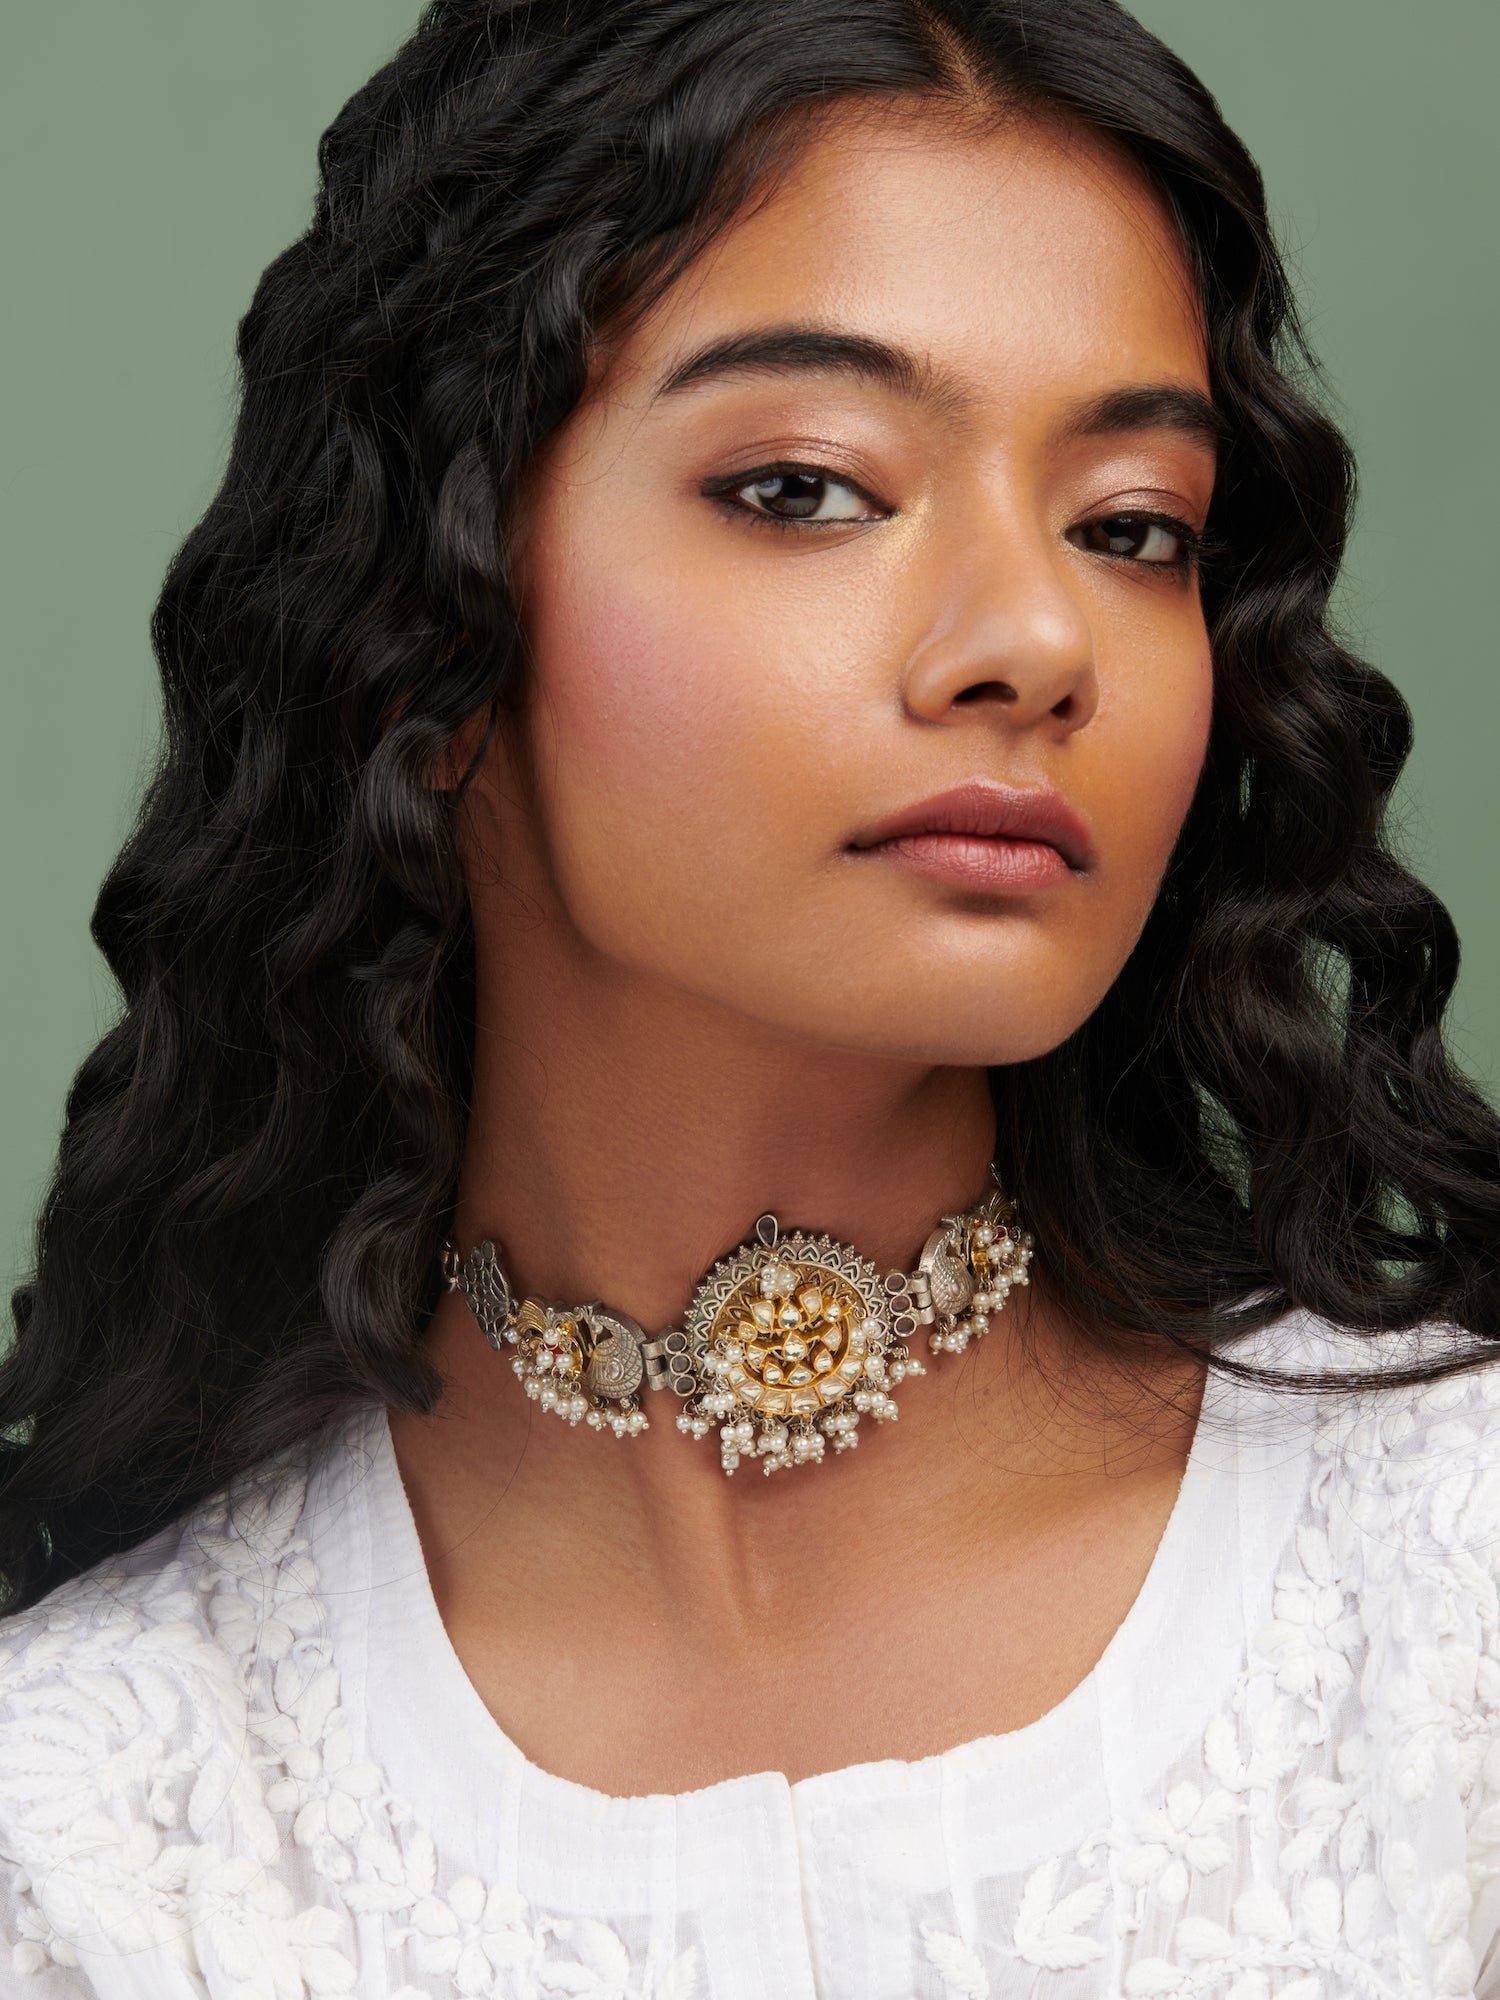 The Gypsy Mor and Moon Choker Necklace 